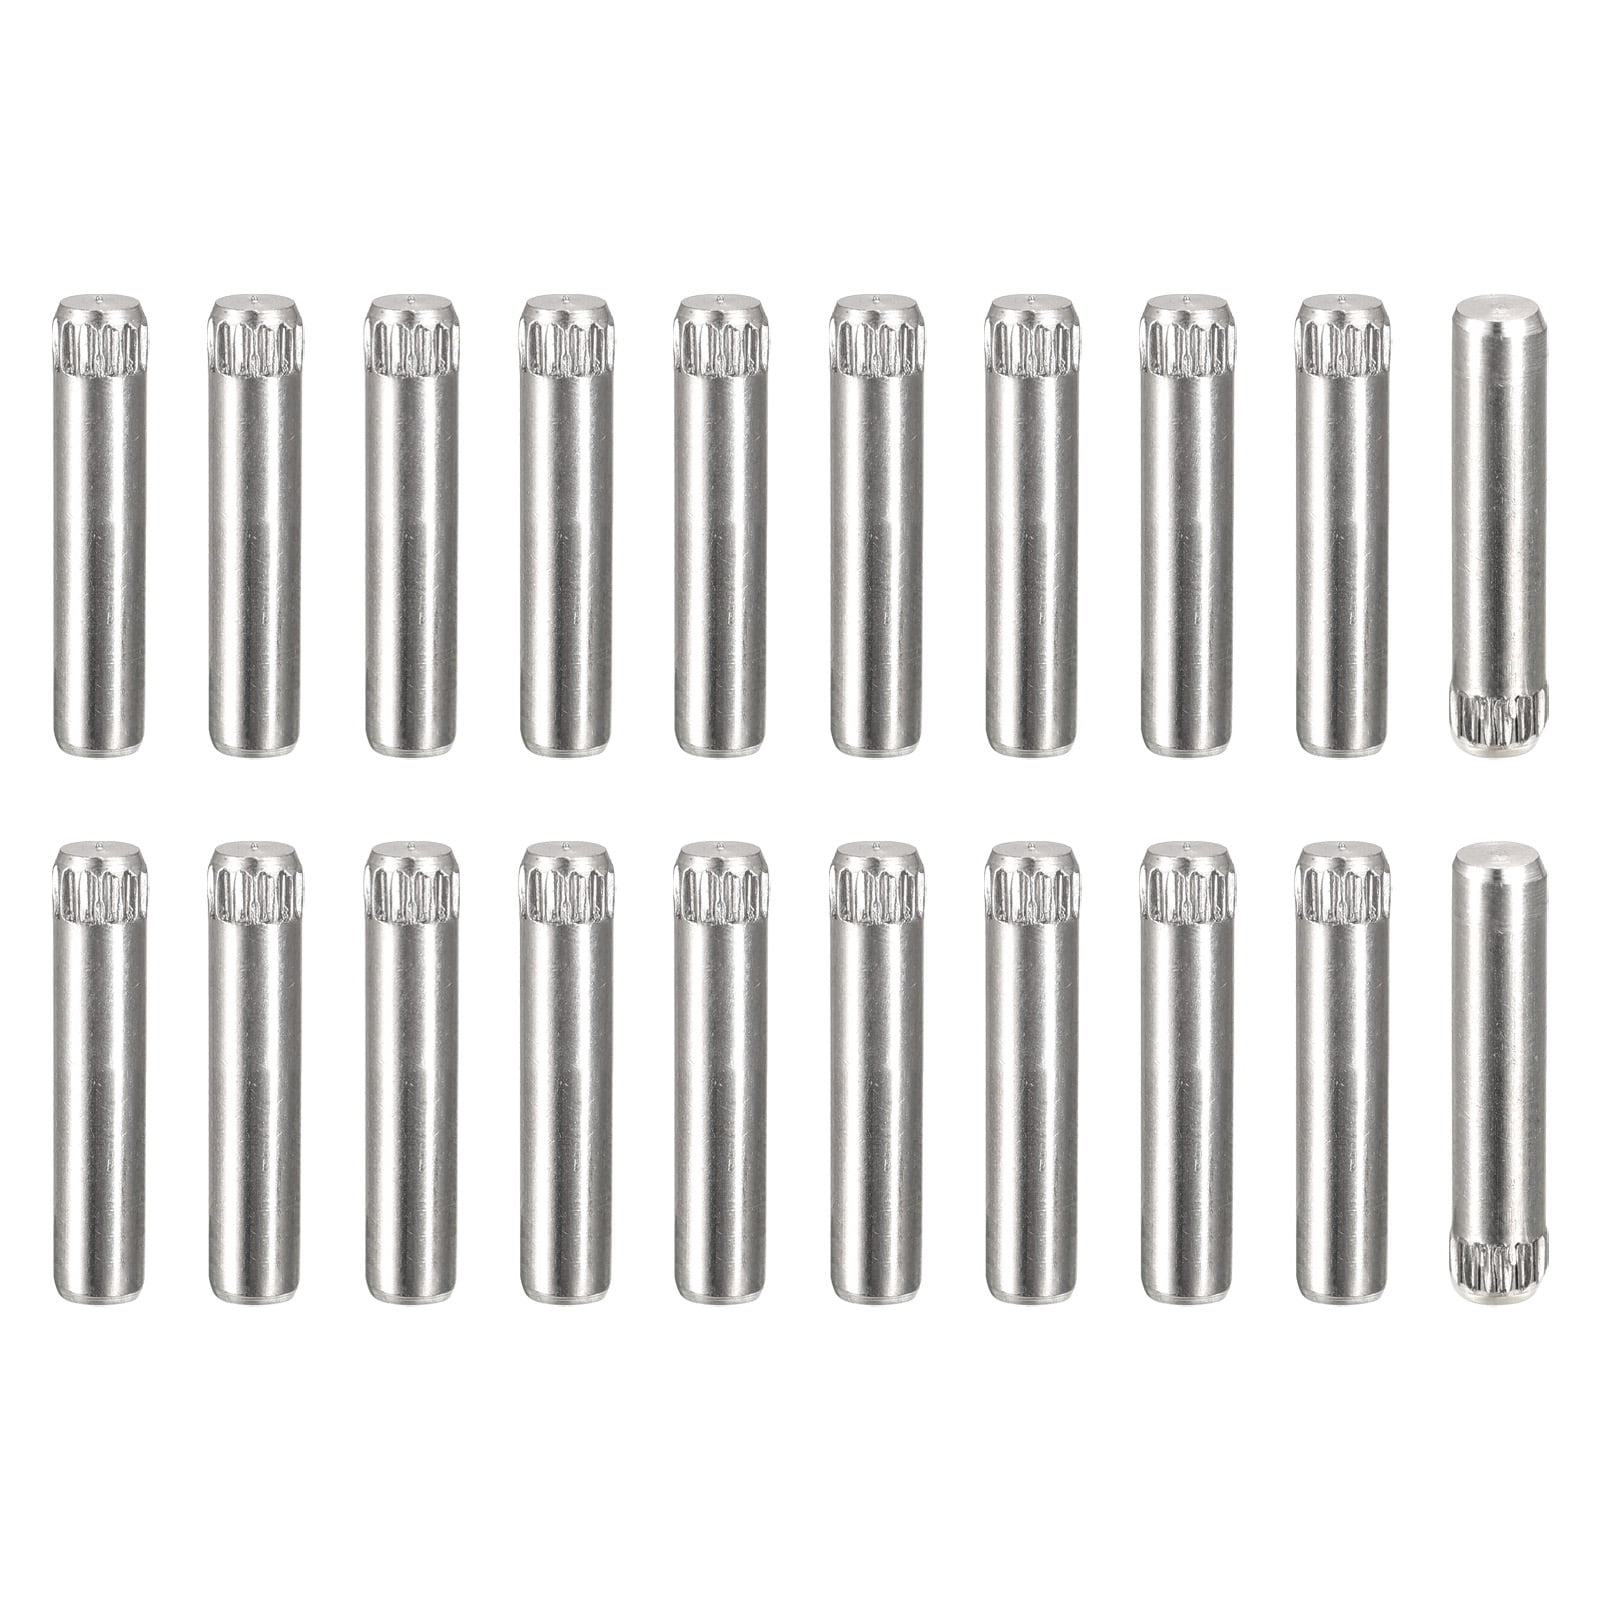 5x14mm 304 Stainless Steel Dowel Pins, 20 Pack Knurled Head Flat End Dowel  Pin